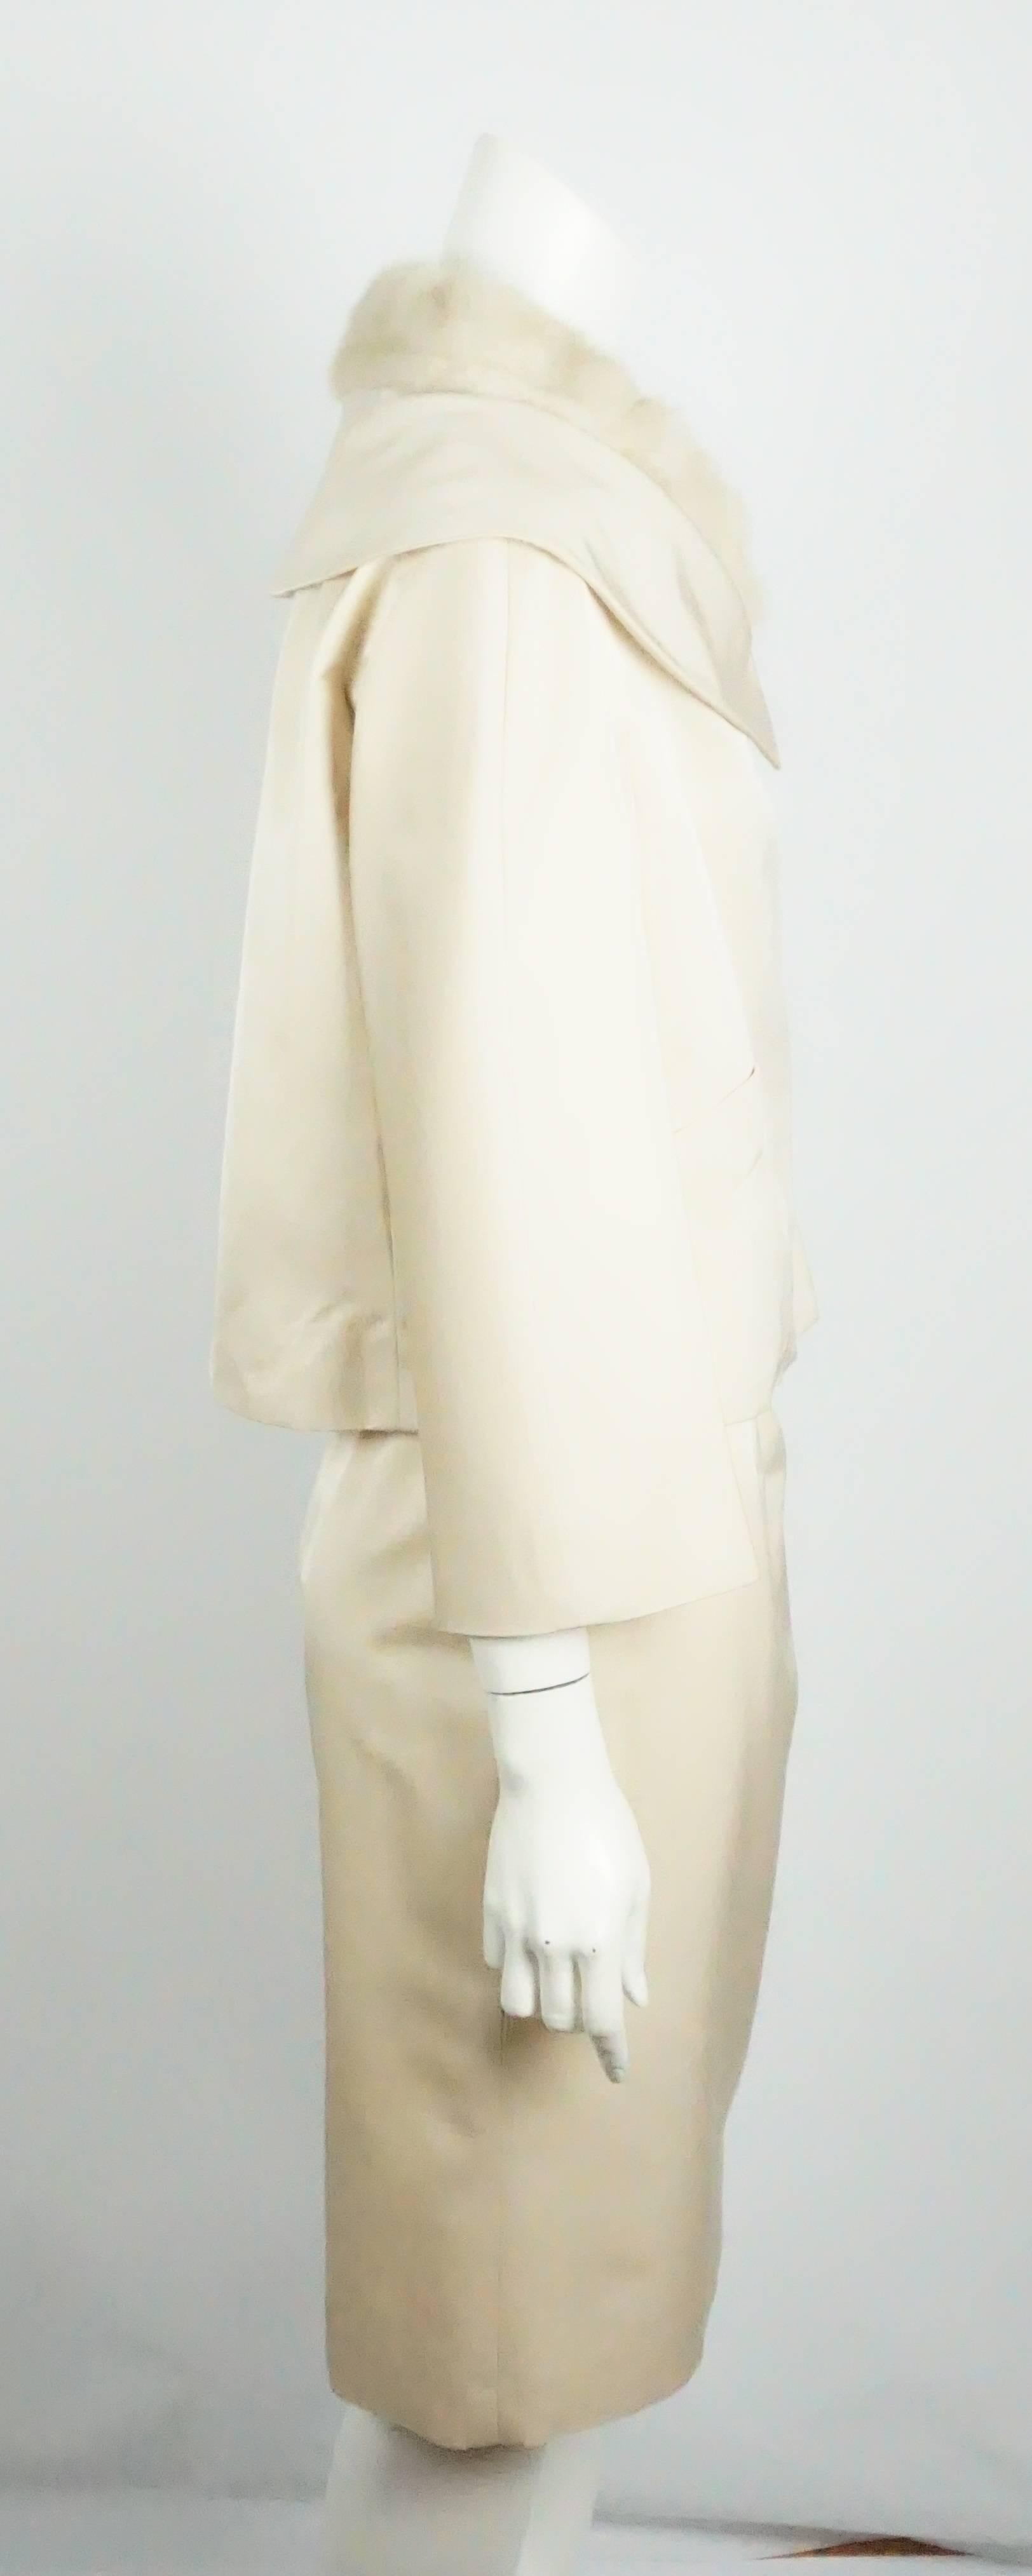 Christian Dior Ecru Silk Skirt Suit with Mink Collar - 38 - NWT  This oh so chic skirt suit is a must have. The ecru silk skirt suit has a non detachable blond mink collar that sits on top of a portrait collar. The suit is fully lined in silk. The